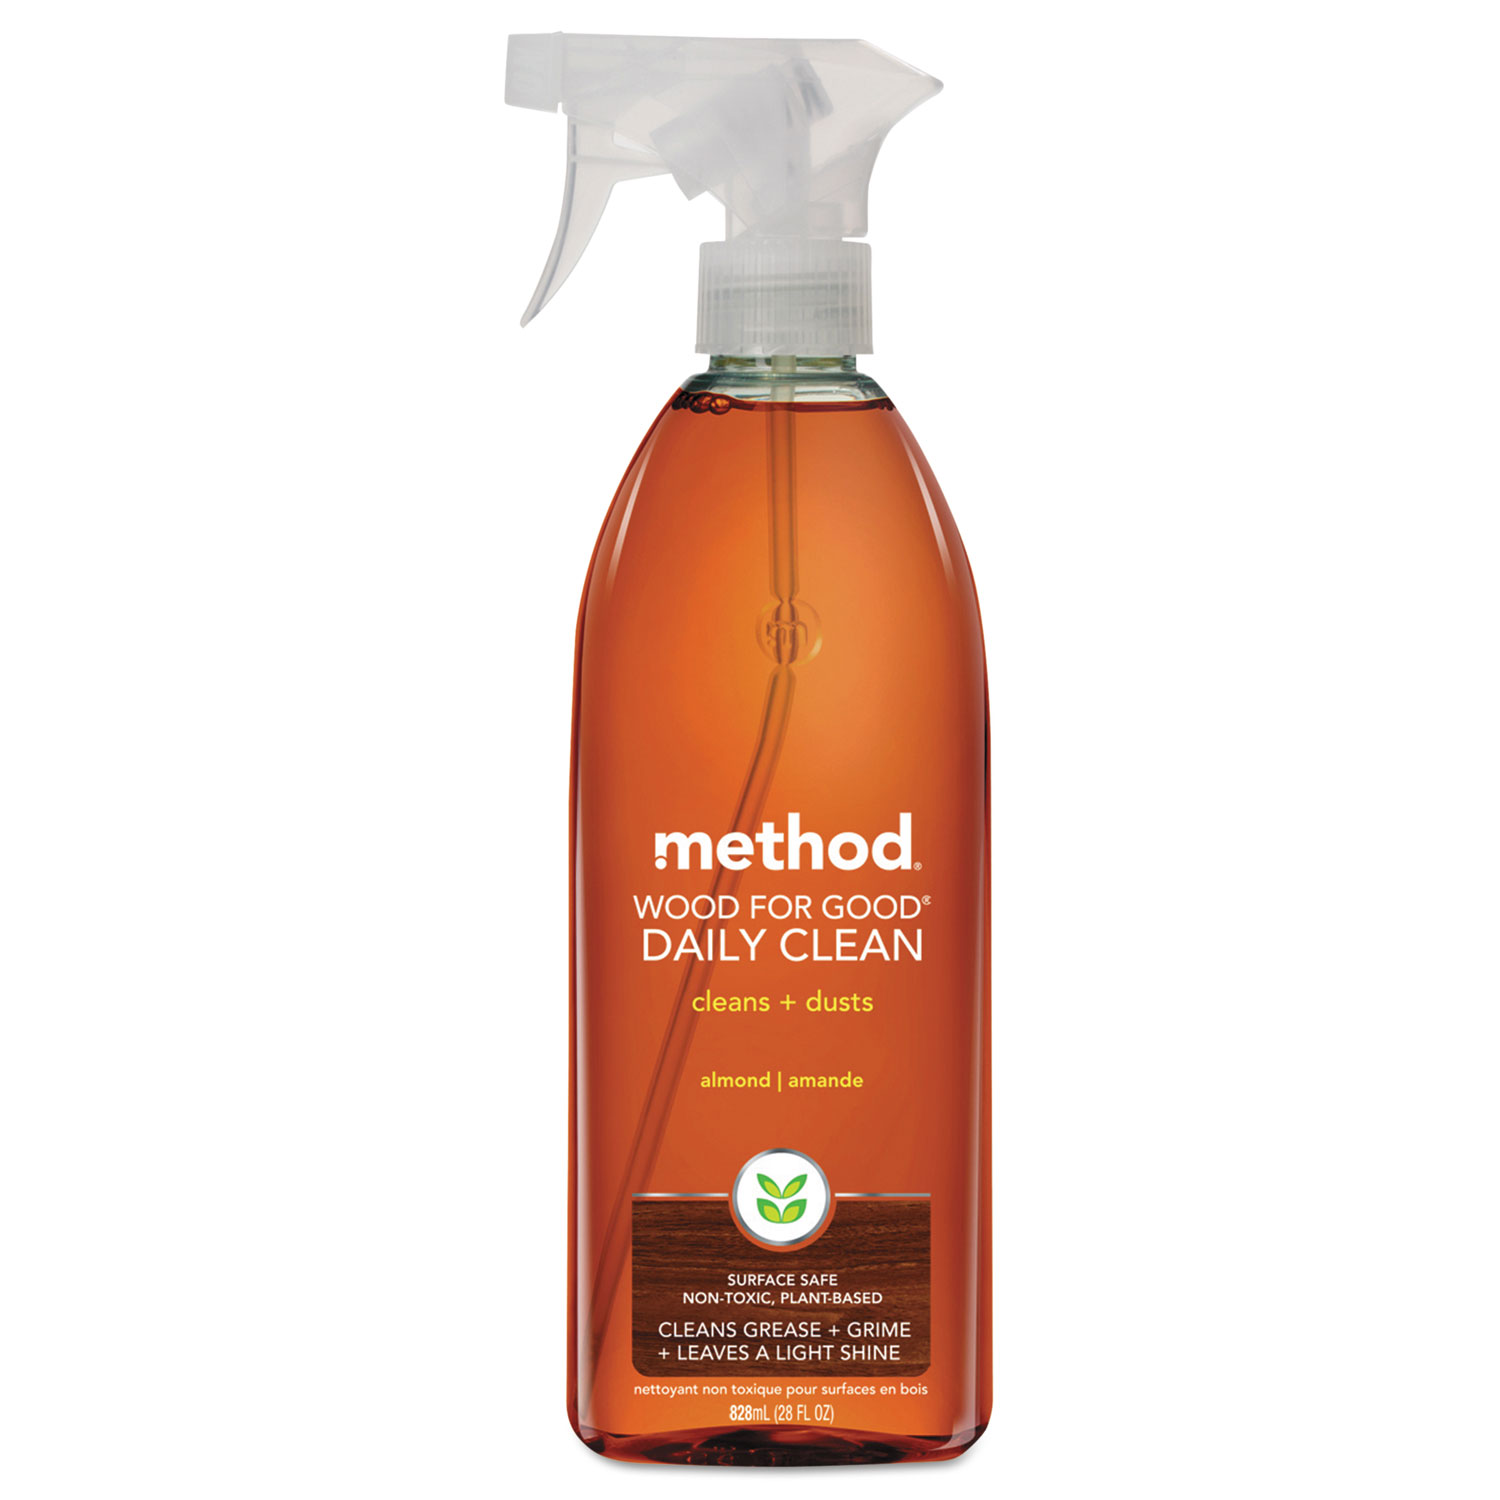  Method 01182 Wood for Good Daily Clean, 28 oz Spray Bottle (MTH01182) 